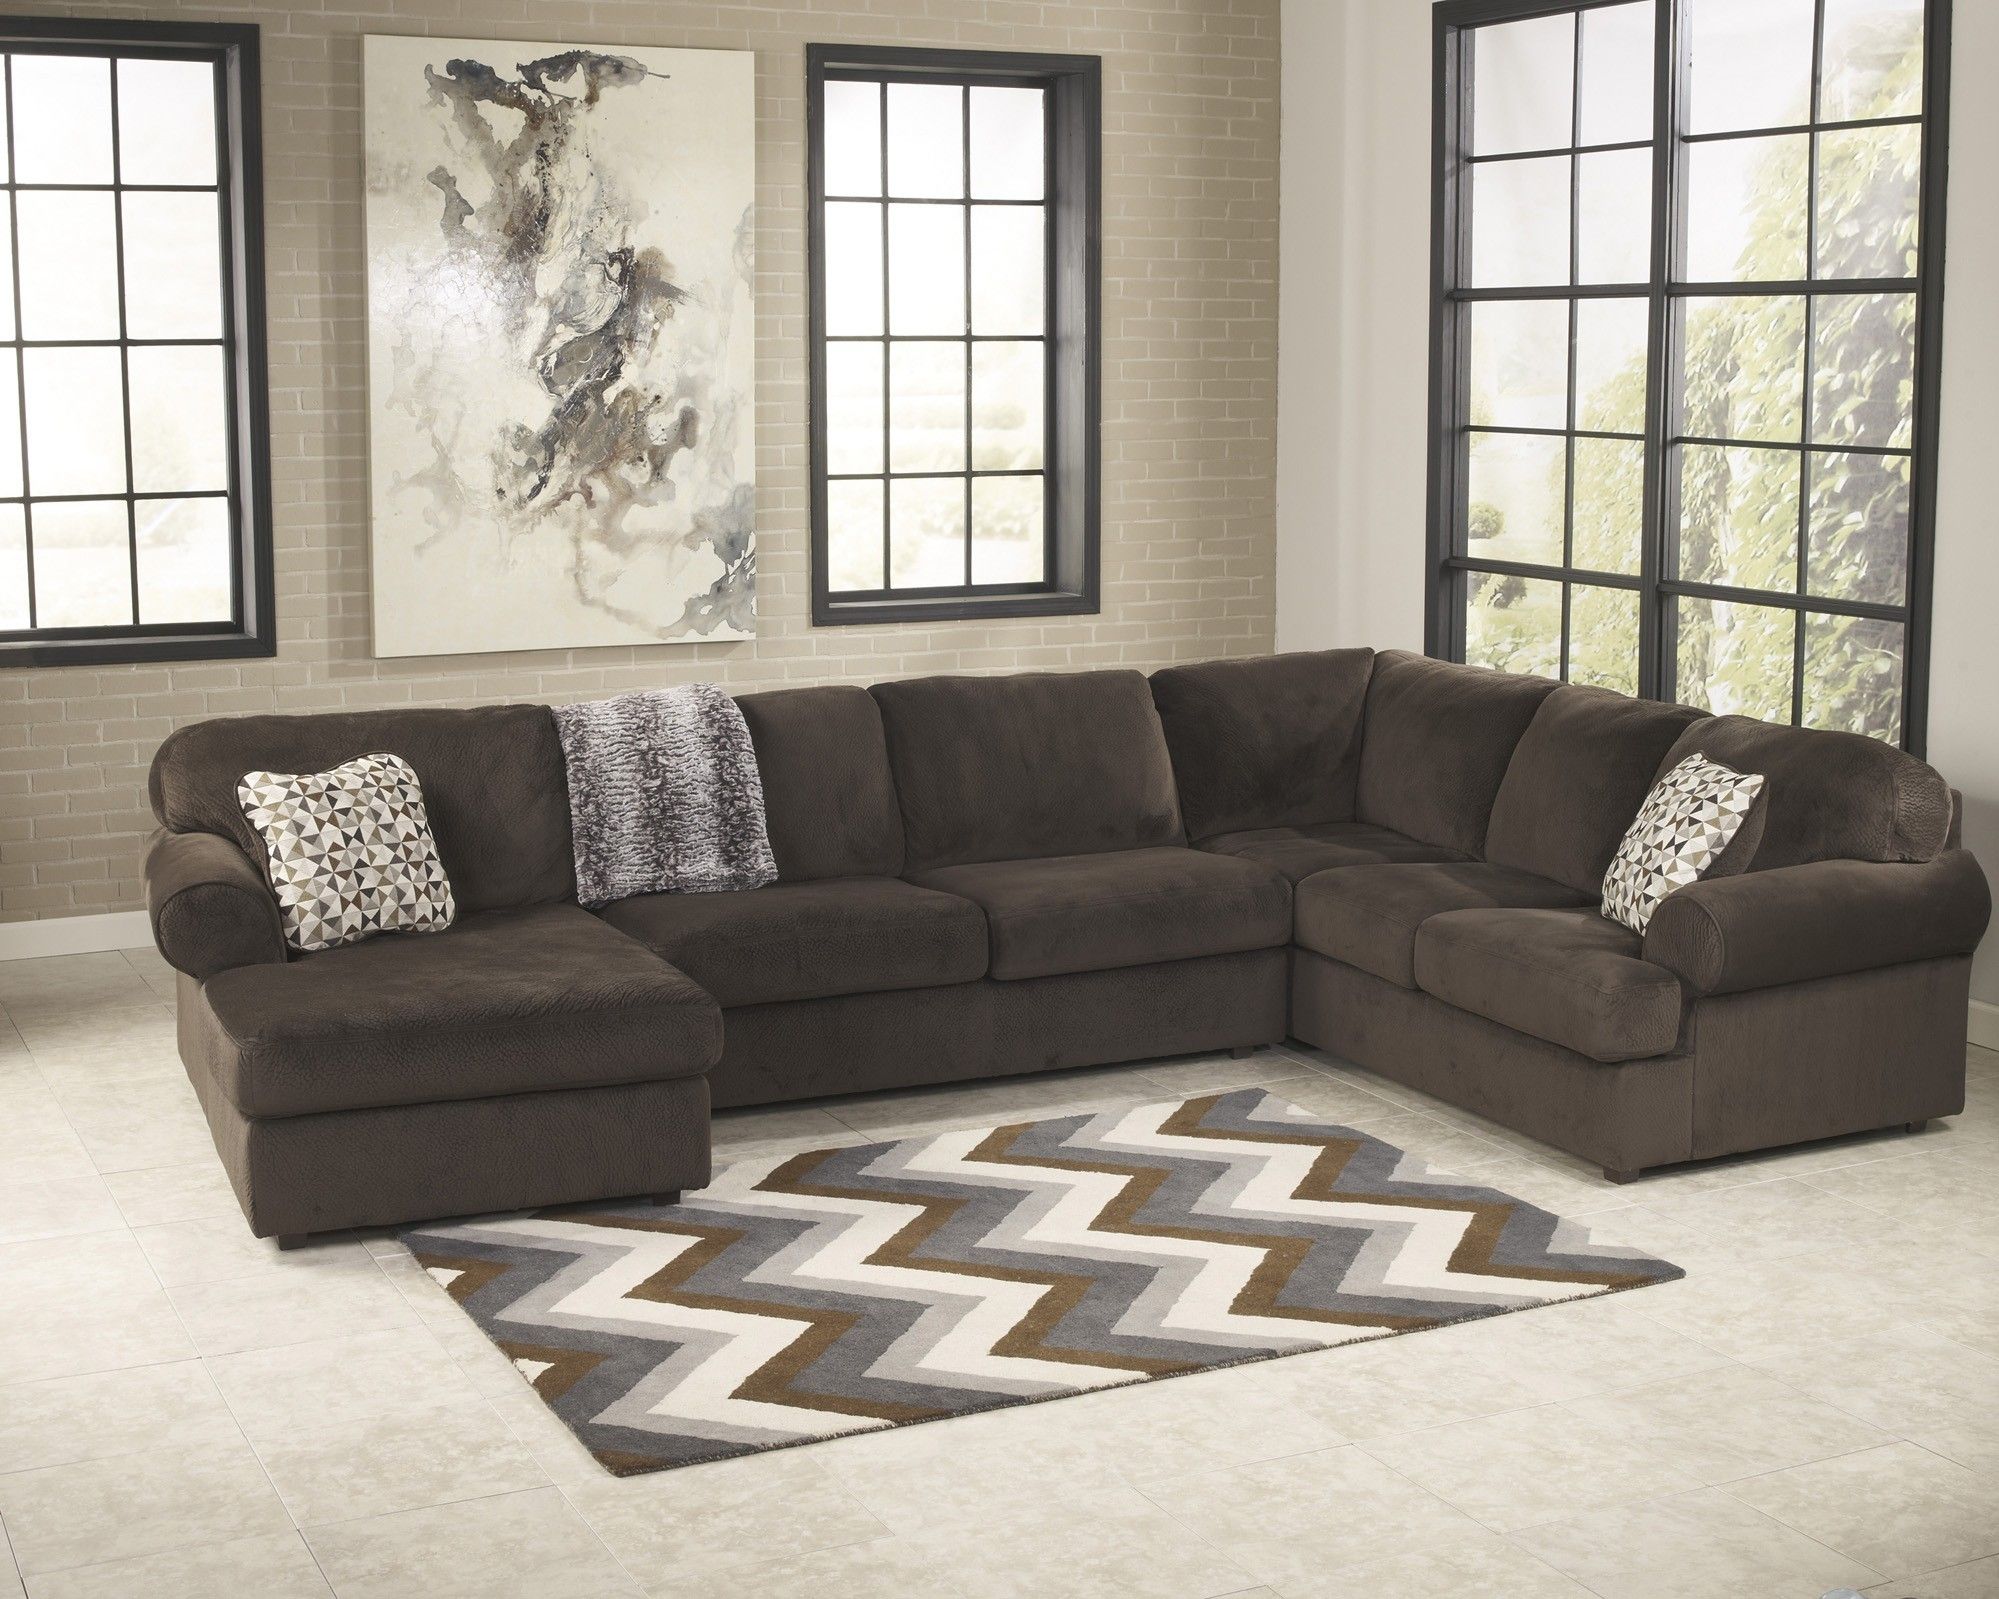 Jessa Place Chocolate 3 Piece Sectional Sofa For $ (View 2 of 10)